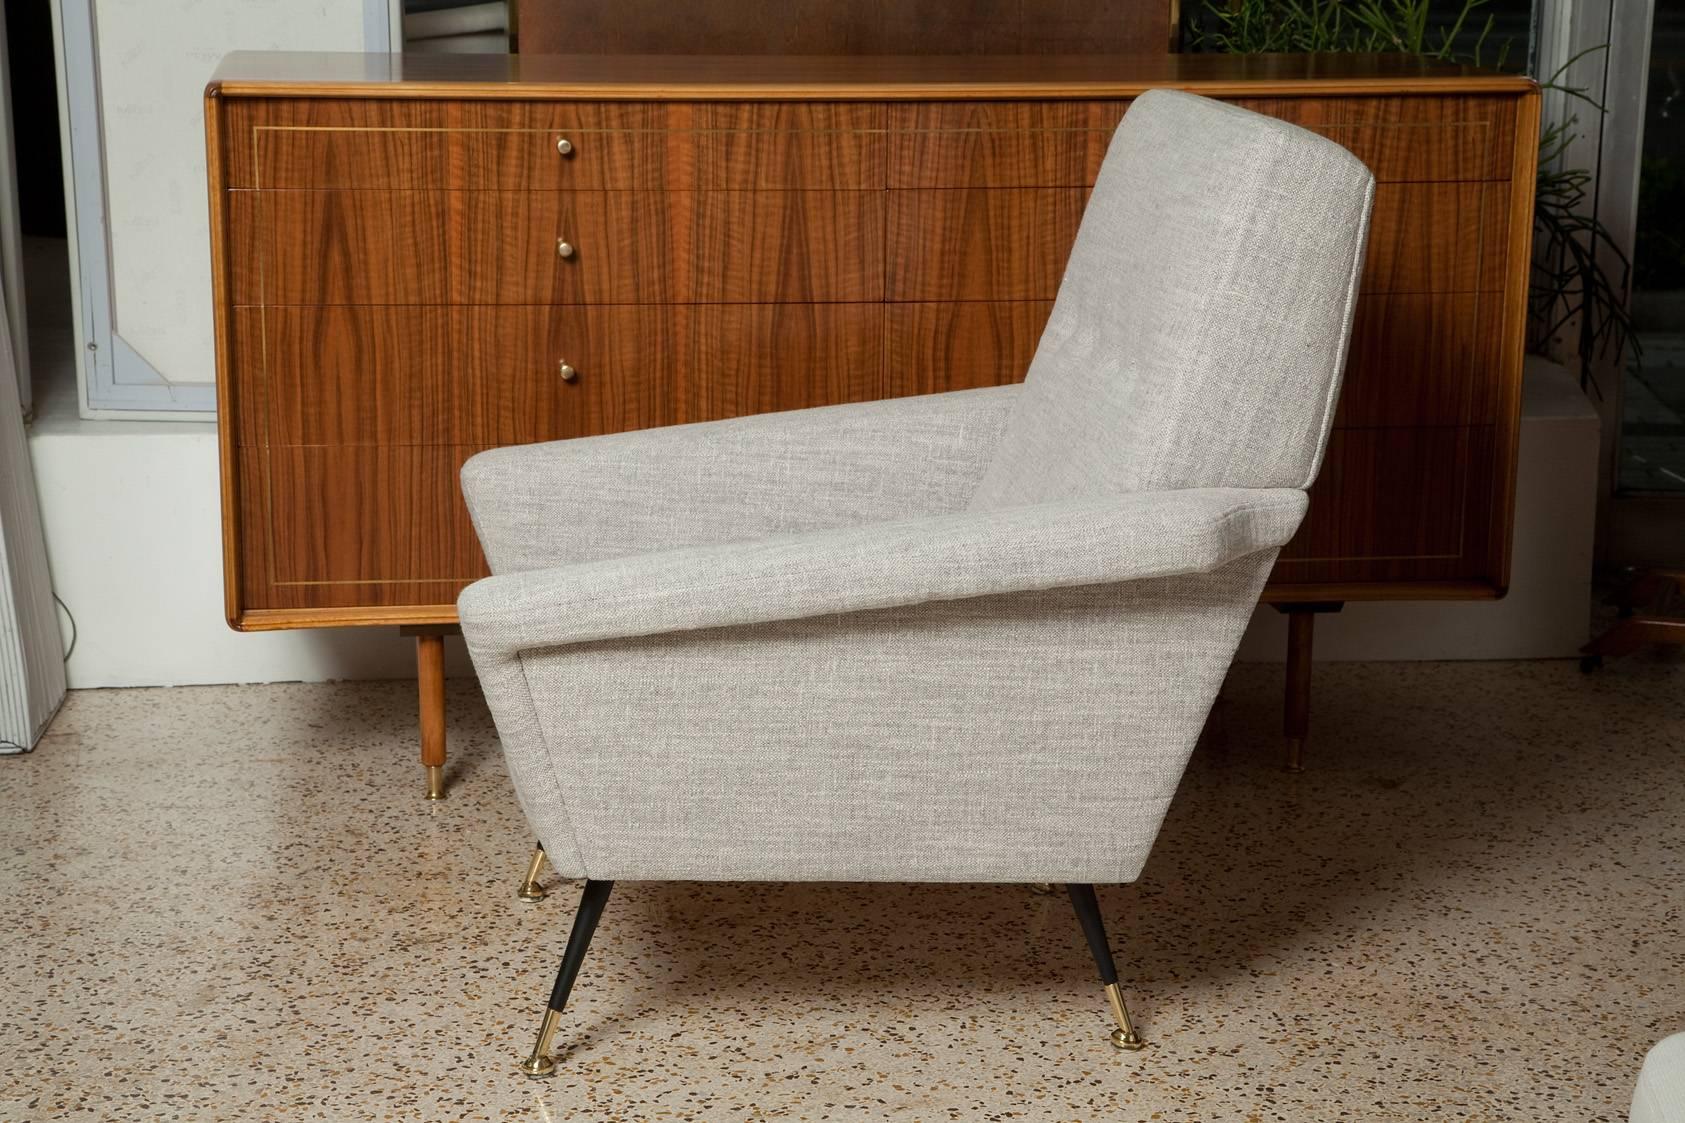 Fully restored pair of 1950s Italian lounge chairs, upholstered in a thick grey and cream interwoven Belgian linen.